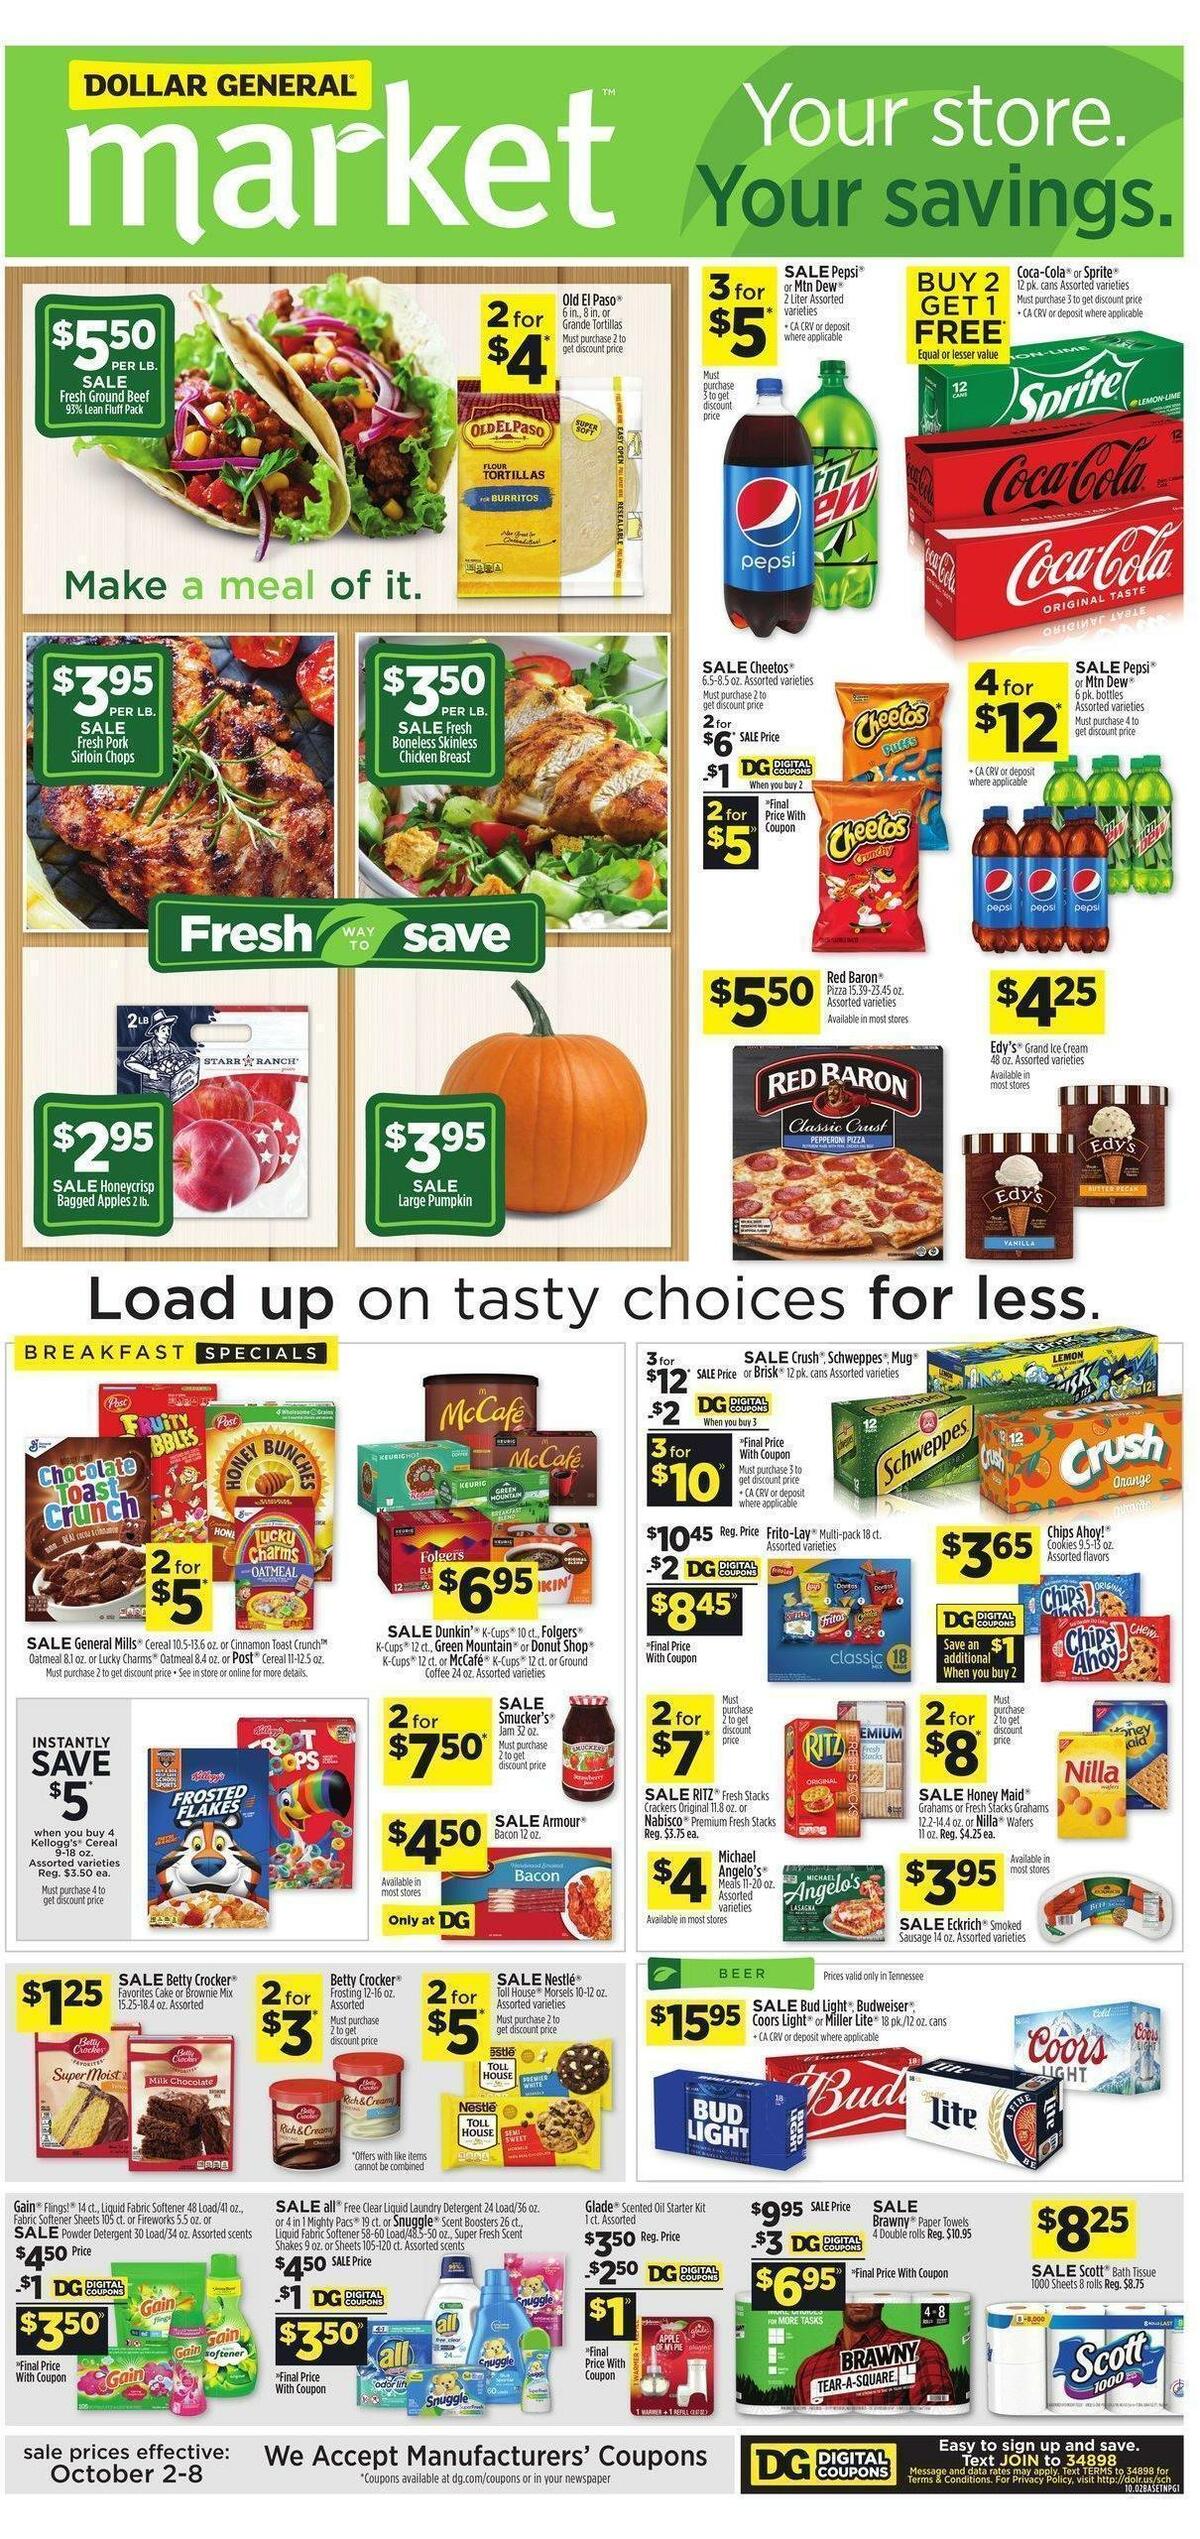 Dollar General Market Ad Weekly Ad from October 2